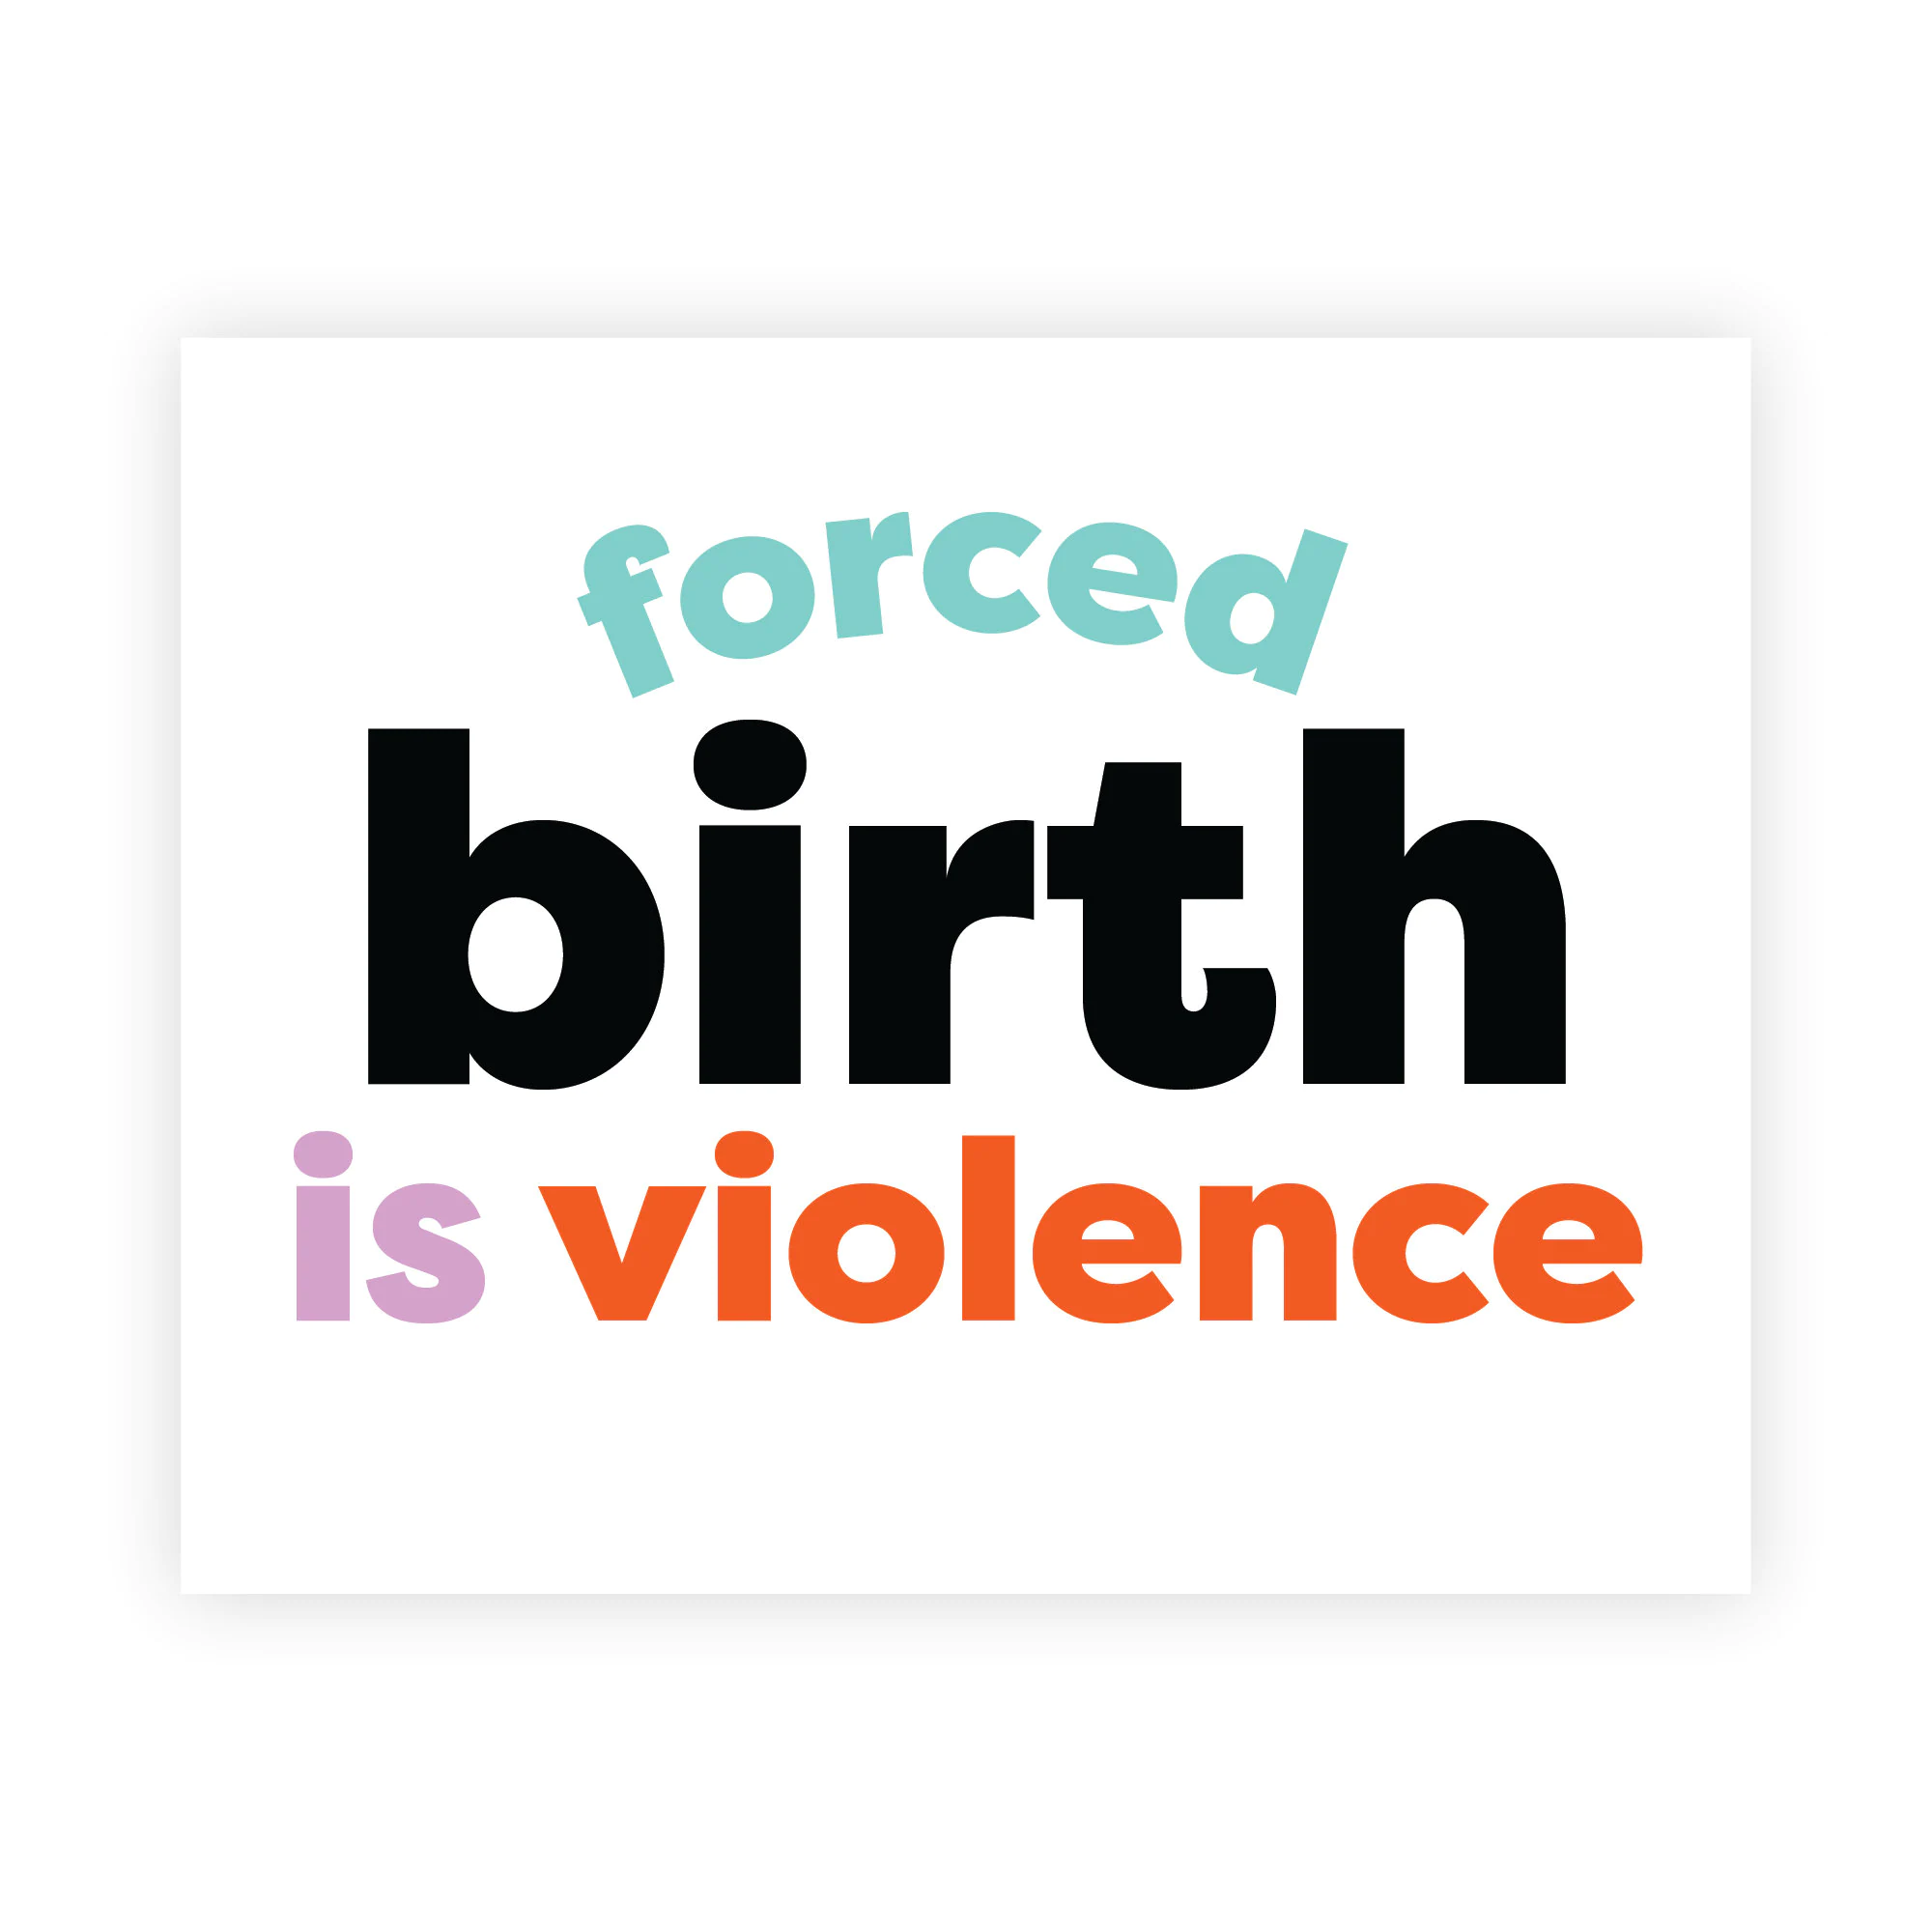 Forced Birth is Violence Sign - Printable Protest Sign - ROE Sign - Abortion Rights Poster - Pro-Choice - Keep Abortion Safe